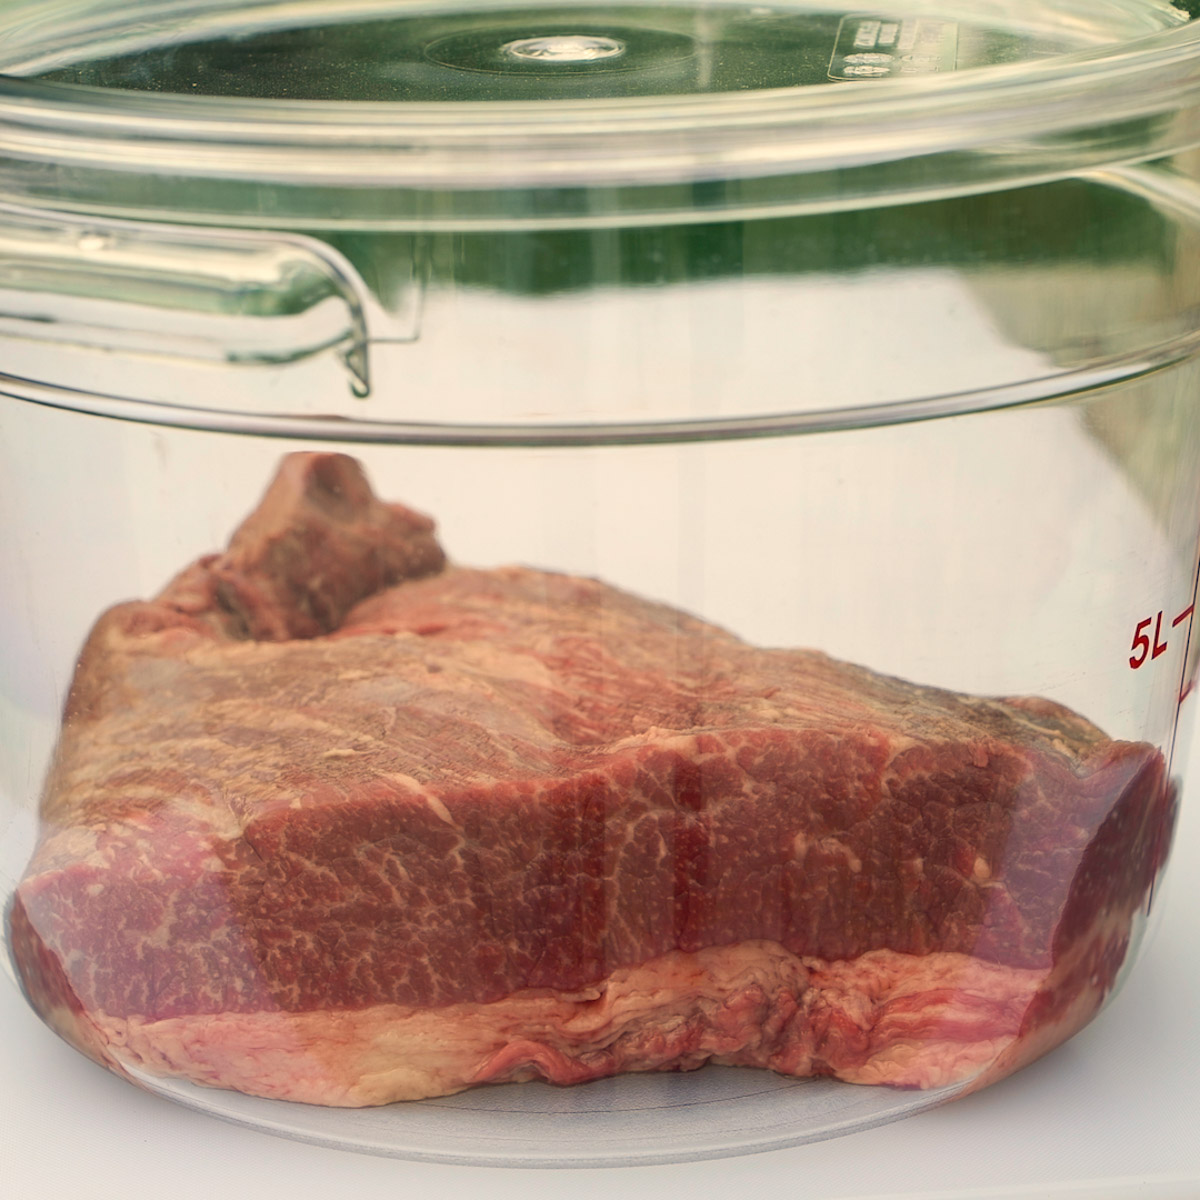 Place the brisket in a tub.
